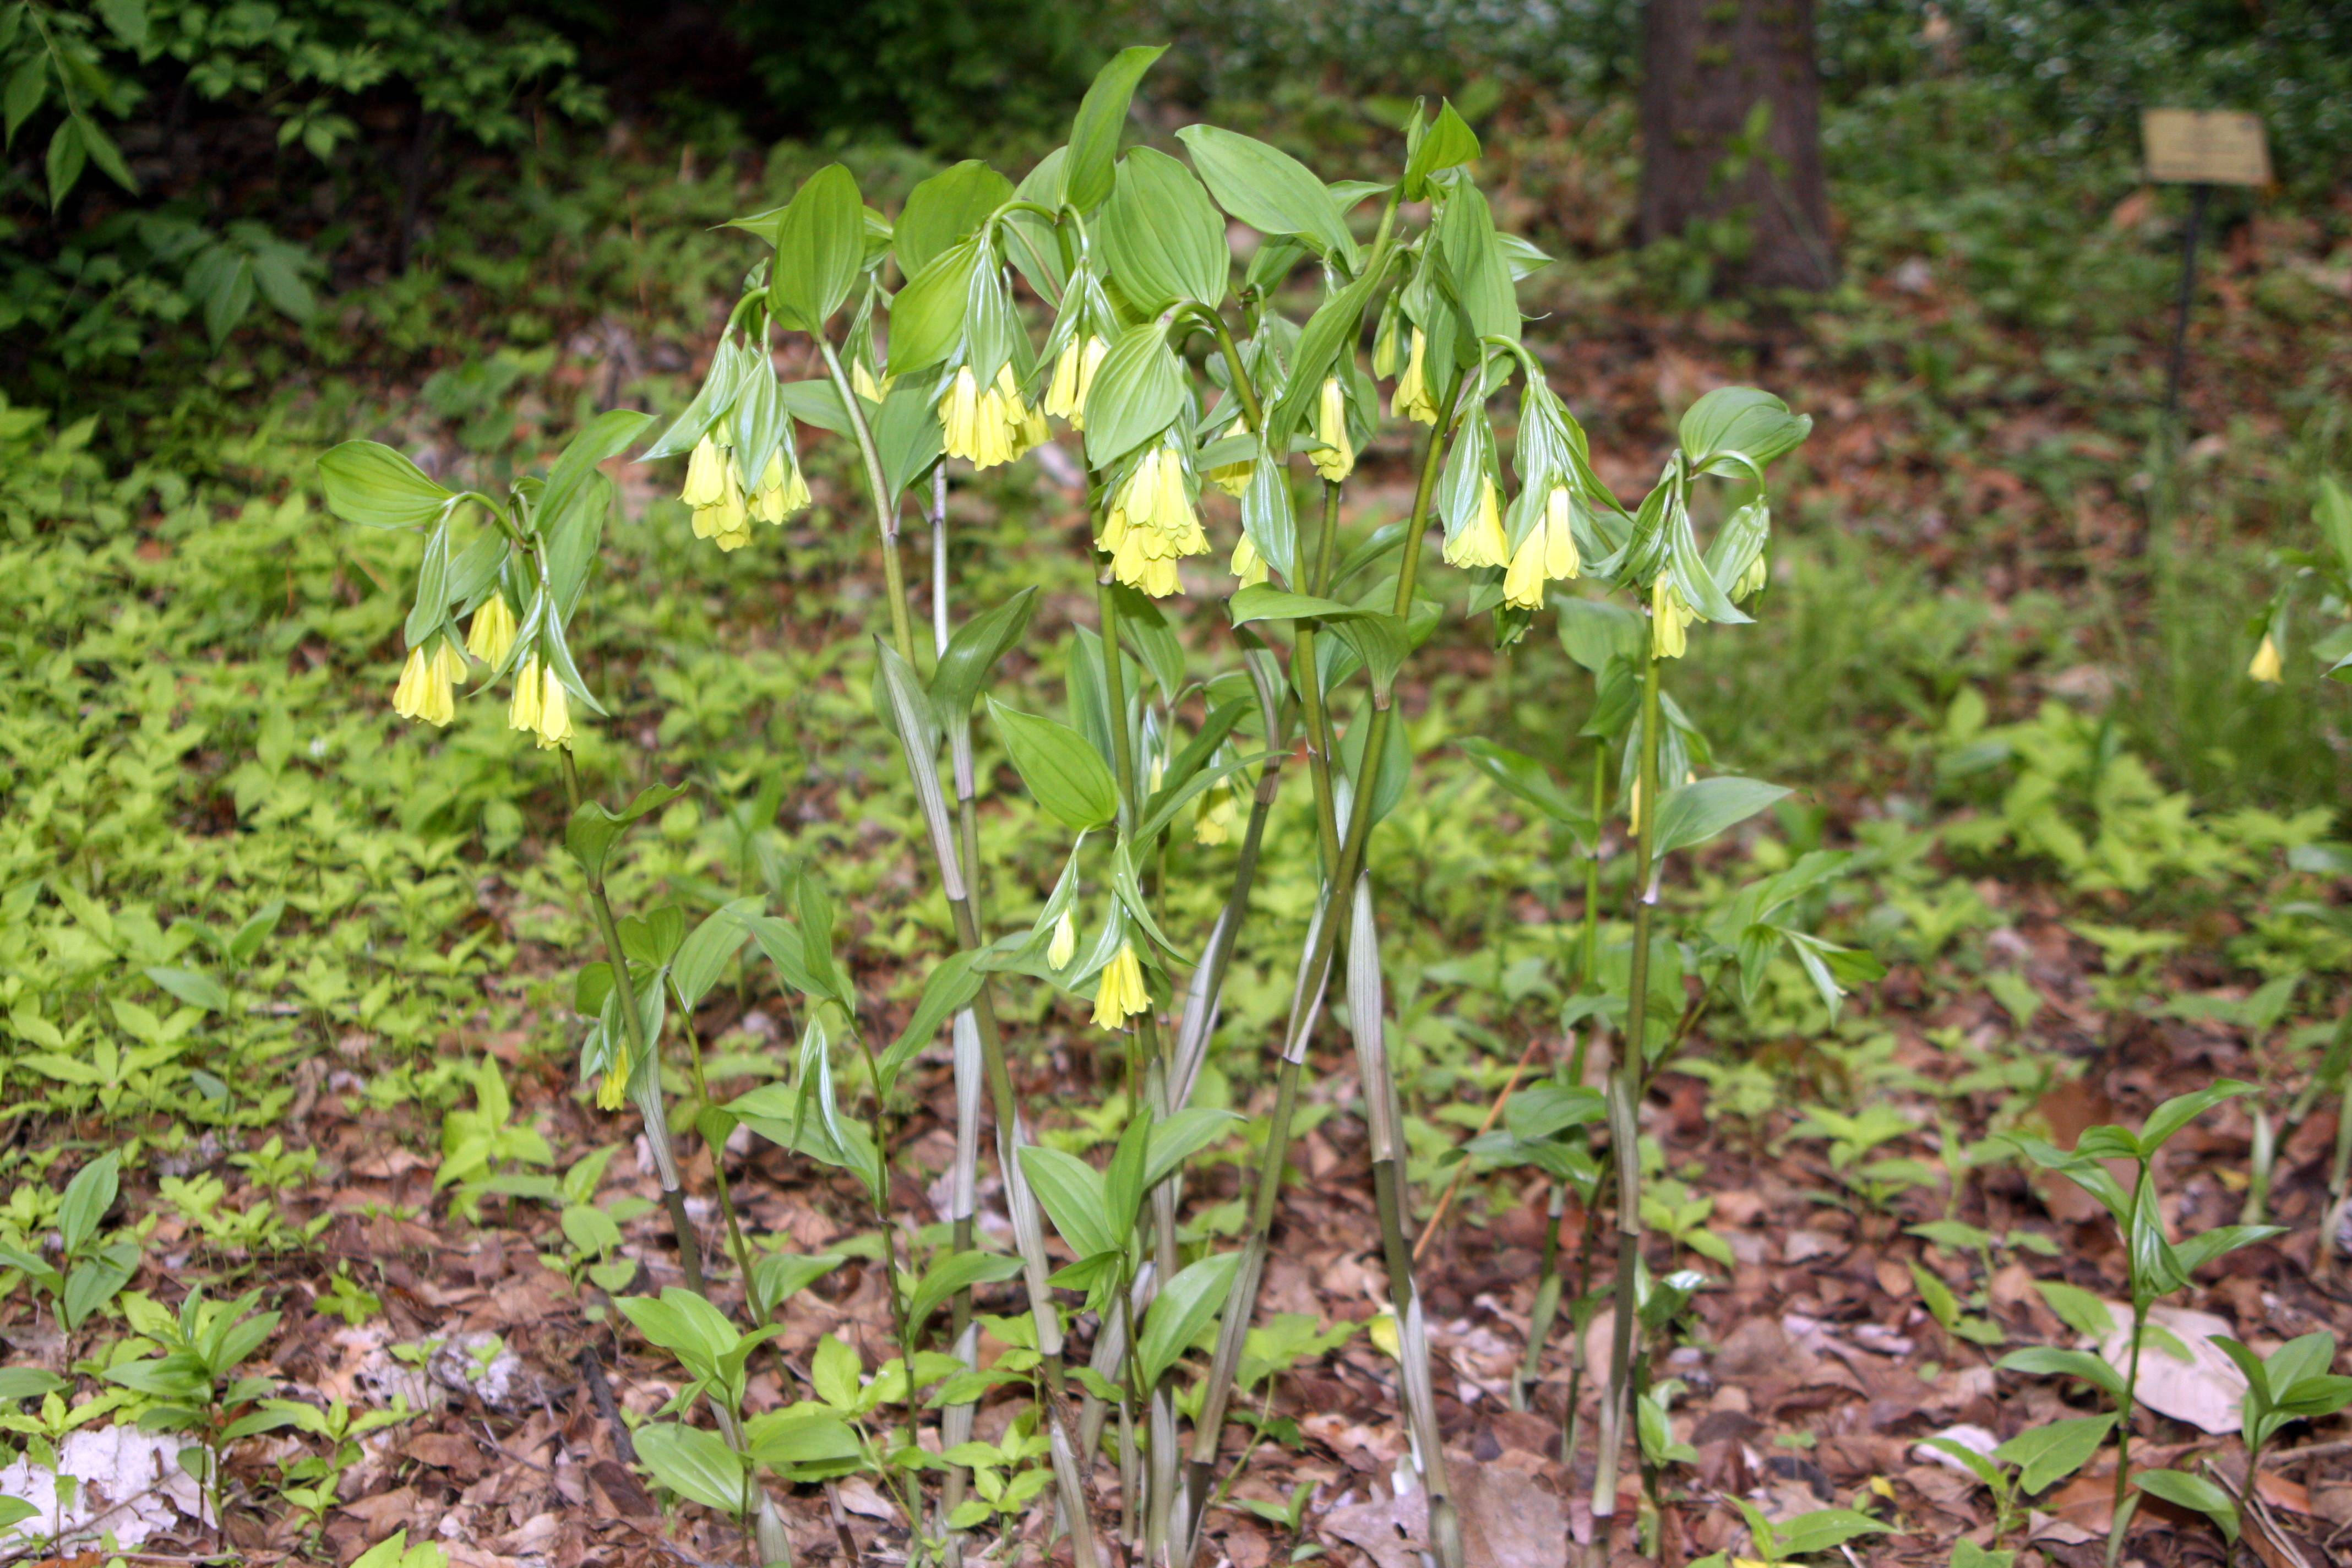 yellow flowers and green leaves with green veins on green-gray stems